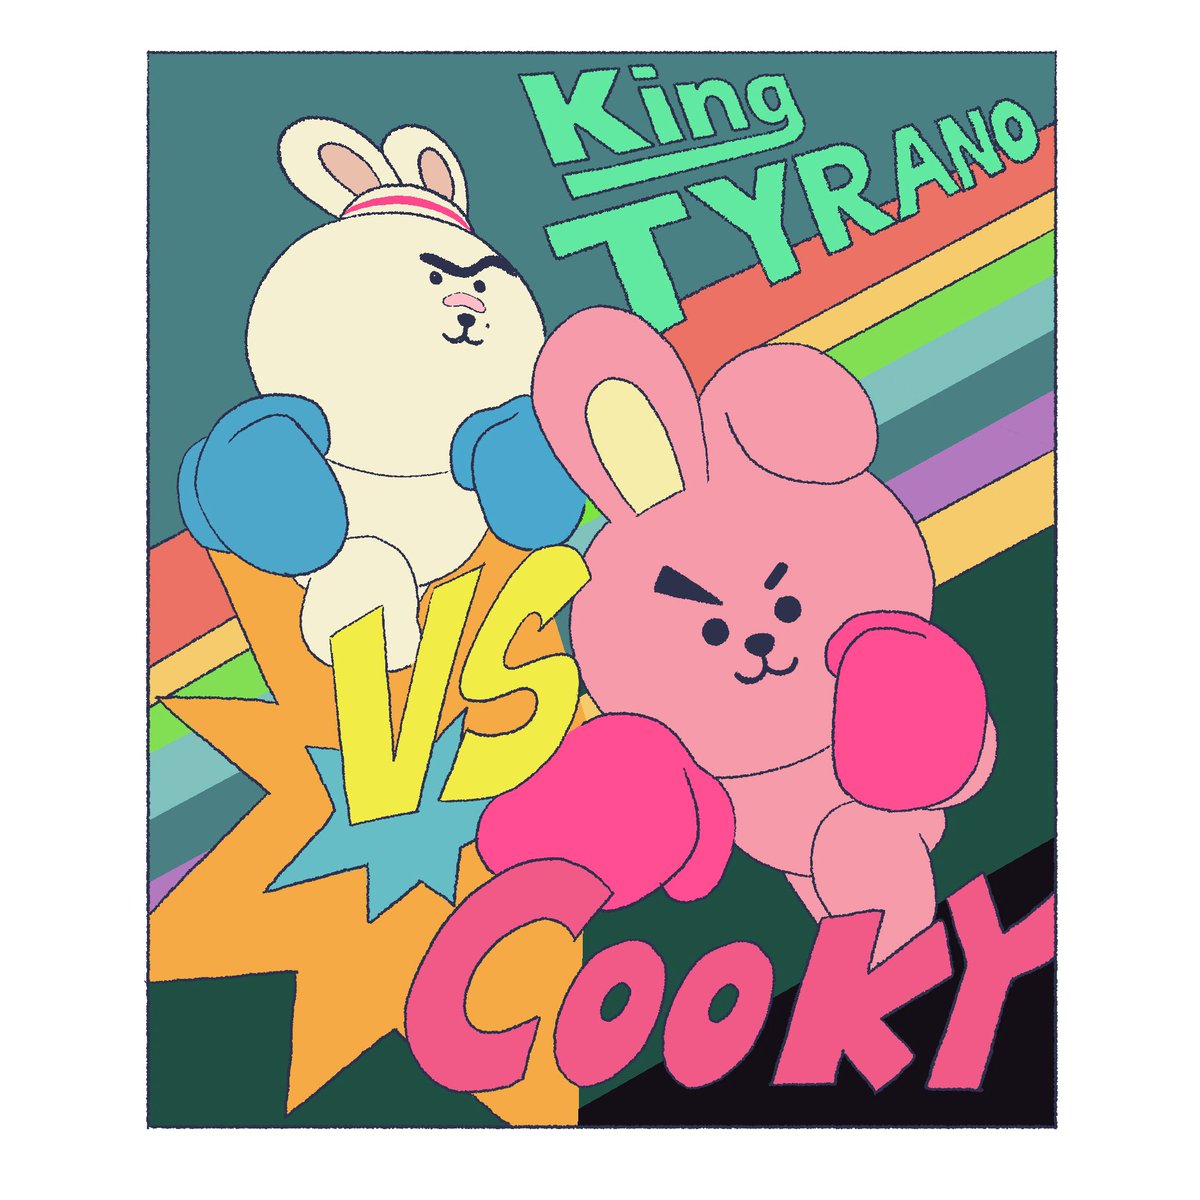 Bt21 On Twitter Cooky Training Hard For The Big Fight Cause Coming From A Boxing Background Doesn T Ensure Victory And The Winner Is Tomorrow Coming Soon To Bt21 Youtube Https T Co Nqw5kozwwl